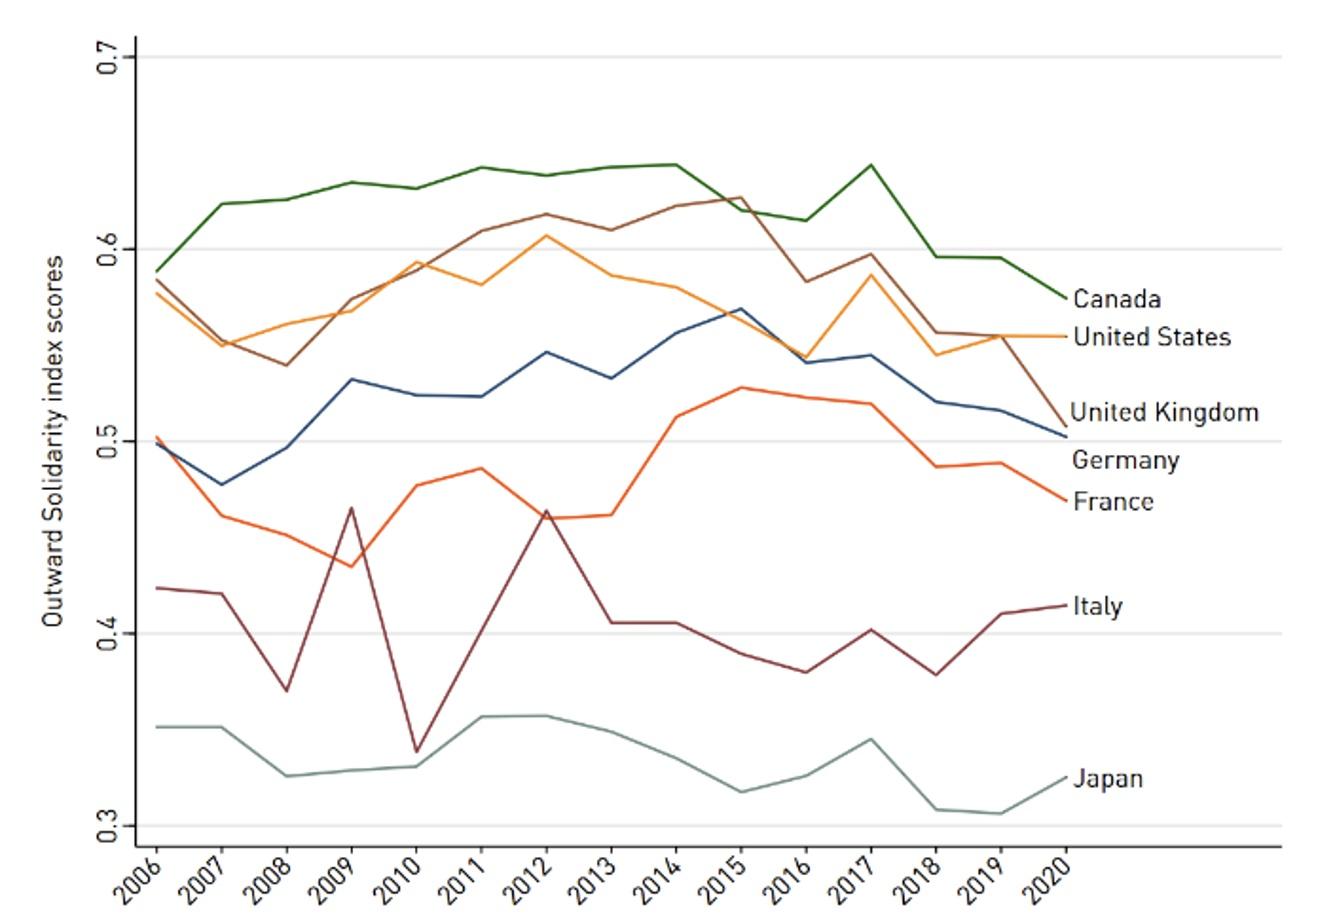 Figure 3b Outward solidarity index over the past 15 years in G7 countries